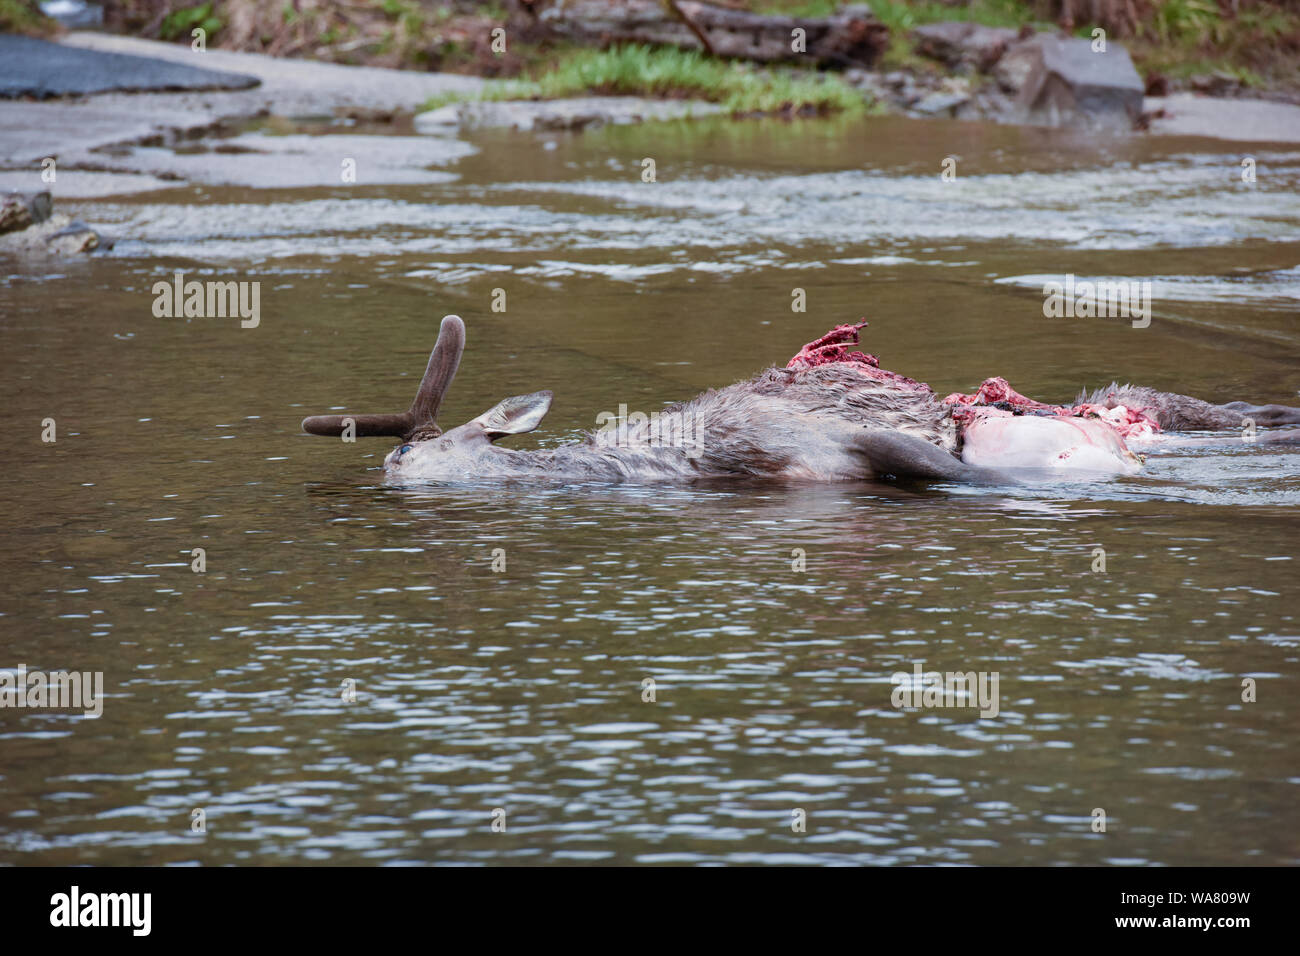 Deer killed by wolves. Eaten animal corpse in the river. Red deer carcass. European wildlife. Poland, Bieszczady mountains Stock Photo